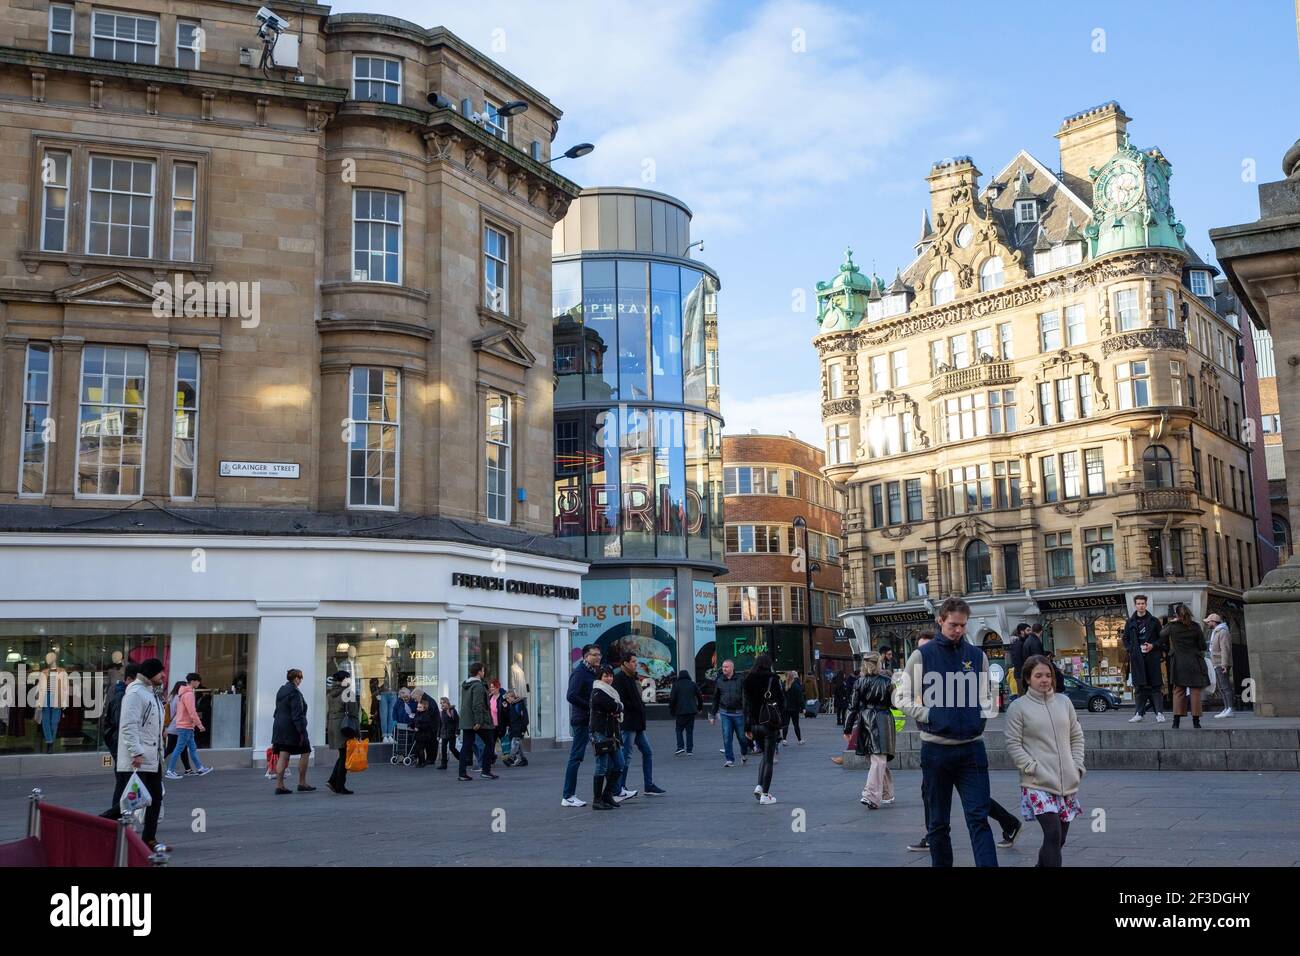 Newcastle upon Tyne England: 2012-02-24: Grainger Street at Gray's Monument. Emerson Chambers Newcastle (Waterstones Building) Stockfoto